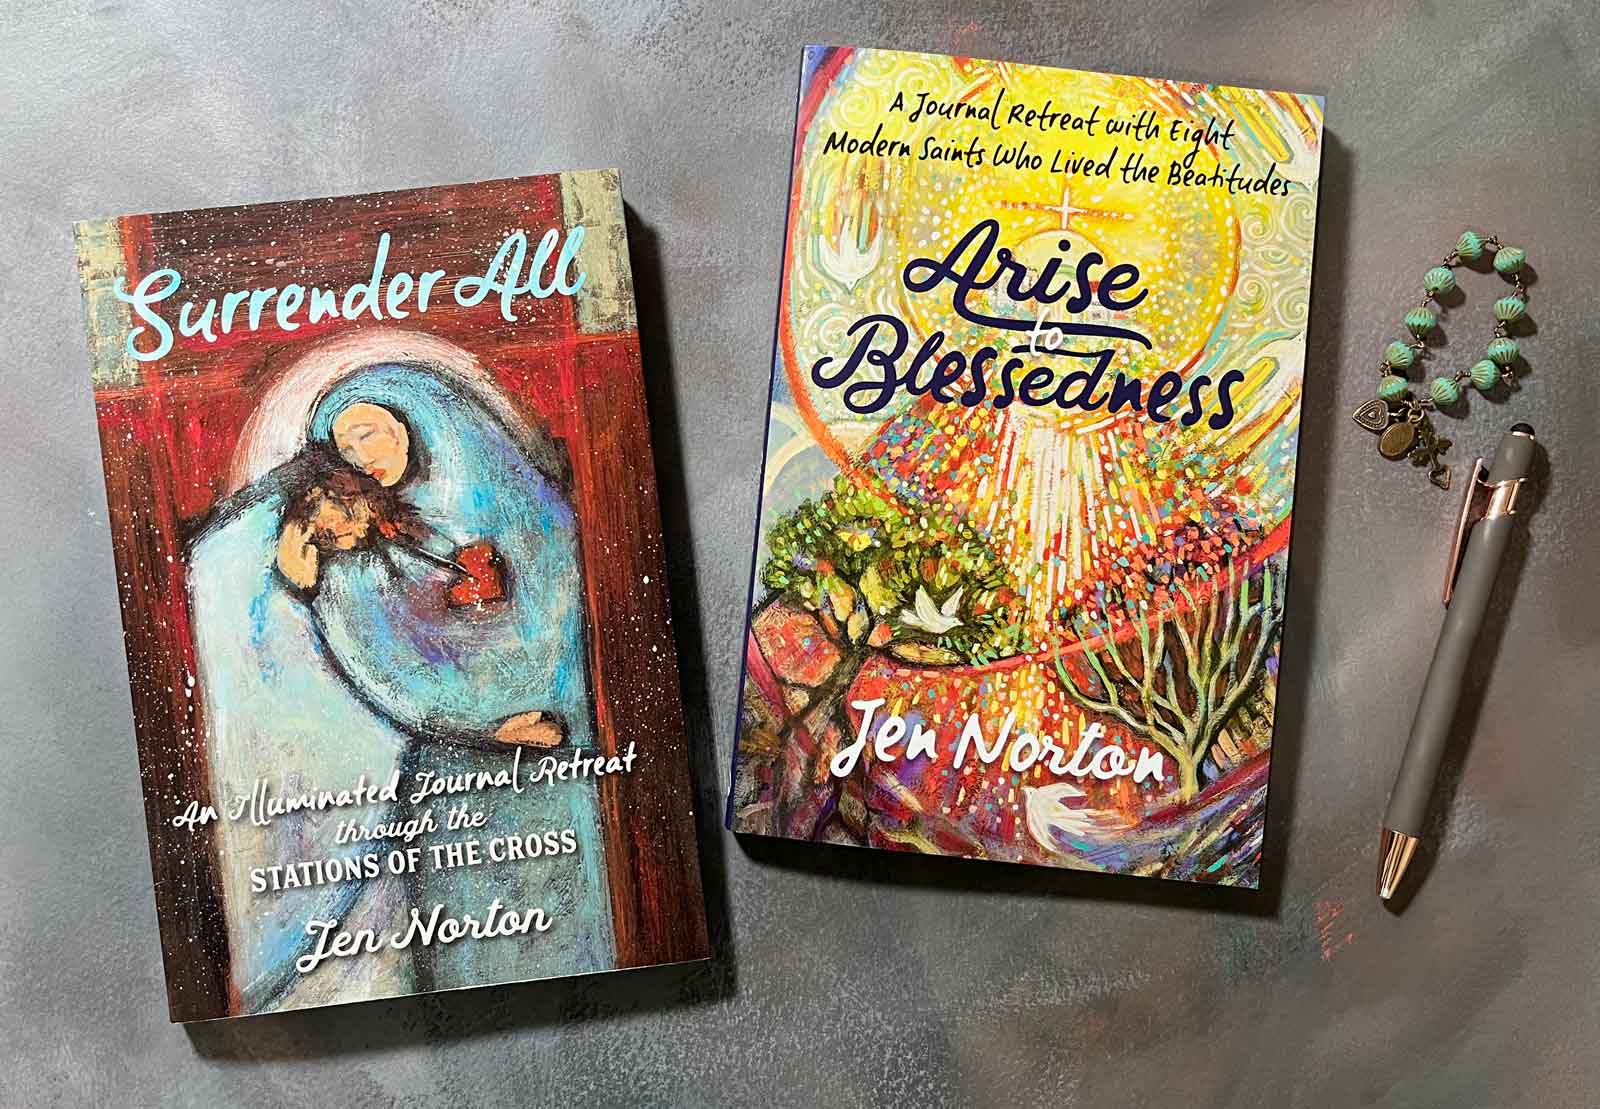 Books by Jen Norton, Ave Maria Press. Surrender All and Arise to Blessedness.